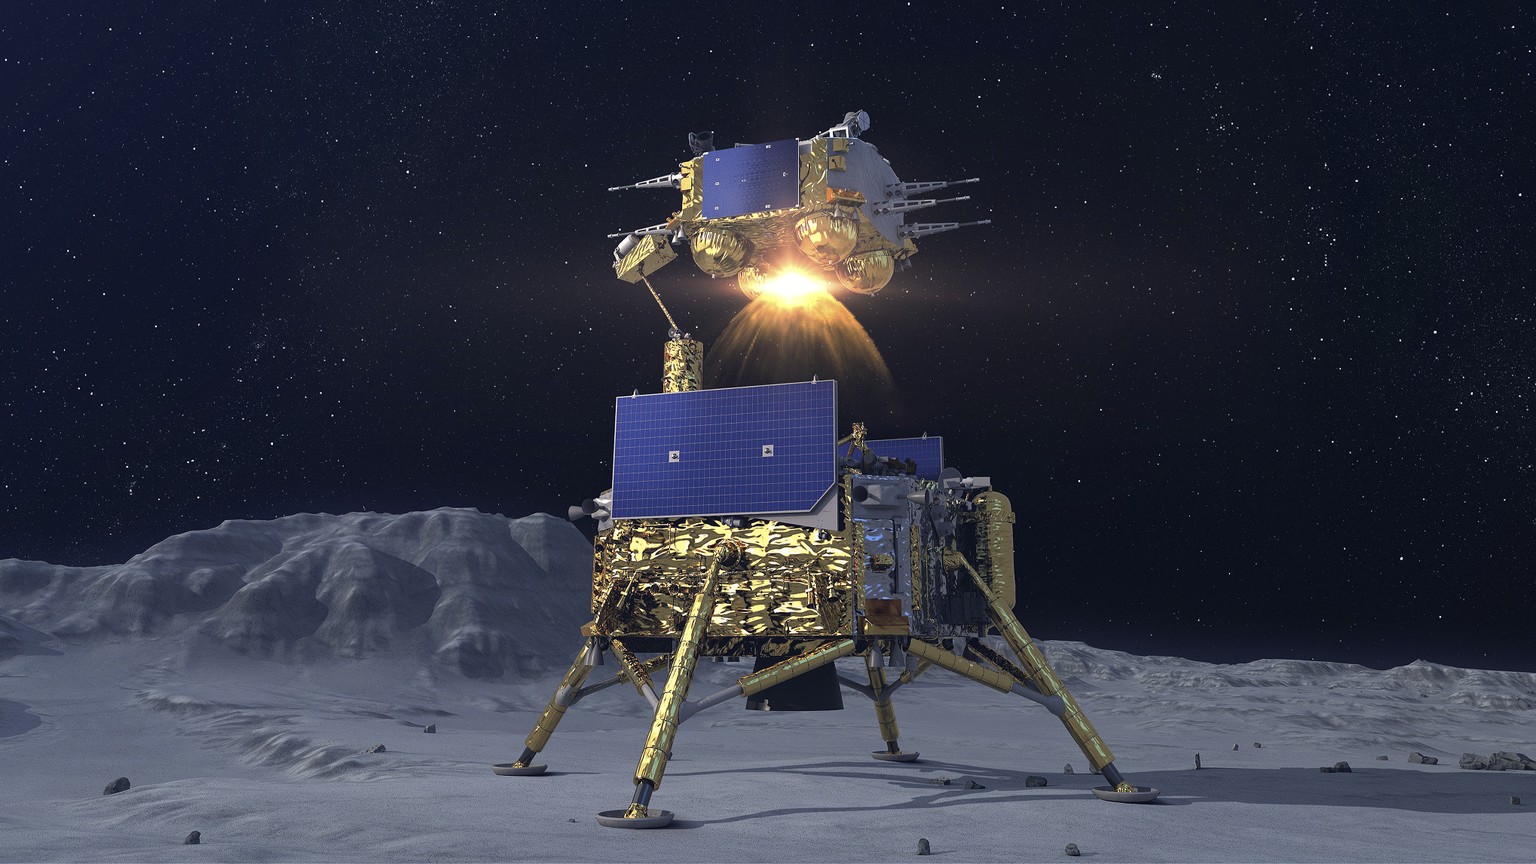 In this China National Space Administration (CNSA) photo released by Xinhua News Agency, a simulated image of the ascender of Chang&#039;e-5 spacecraft blasting off from the lunar surface at the Beiji ...